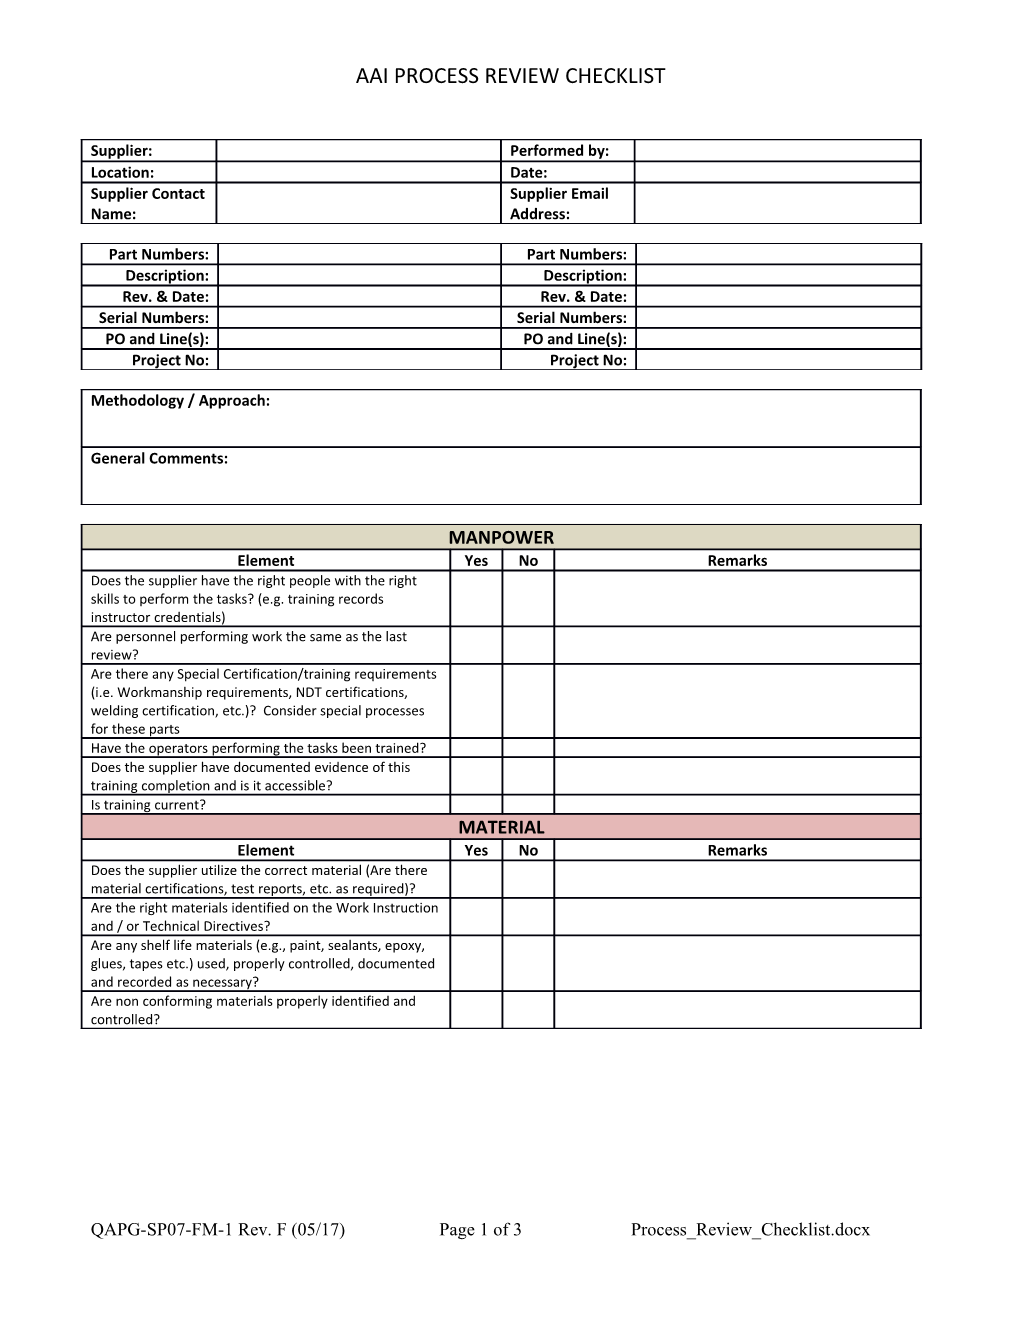 QAPG-SP07-FM-1 Rev. F (05/17)Page 1 of 3Process Review Checklist